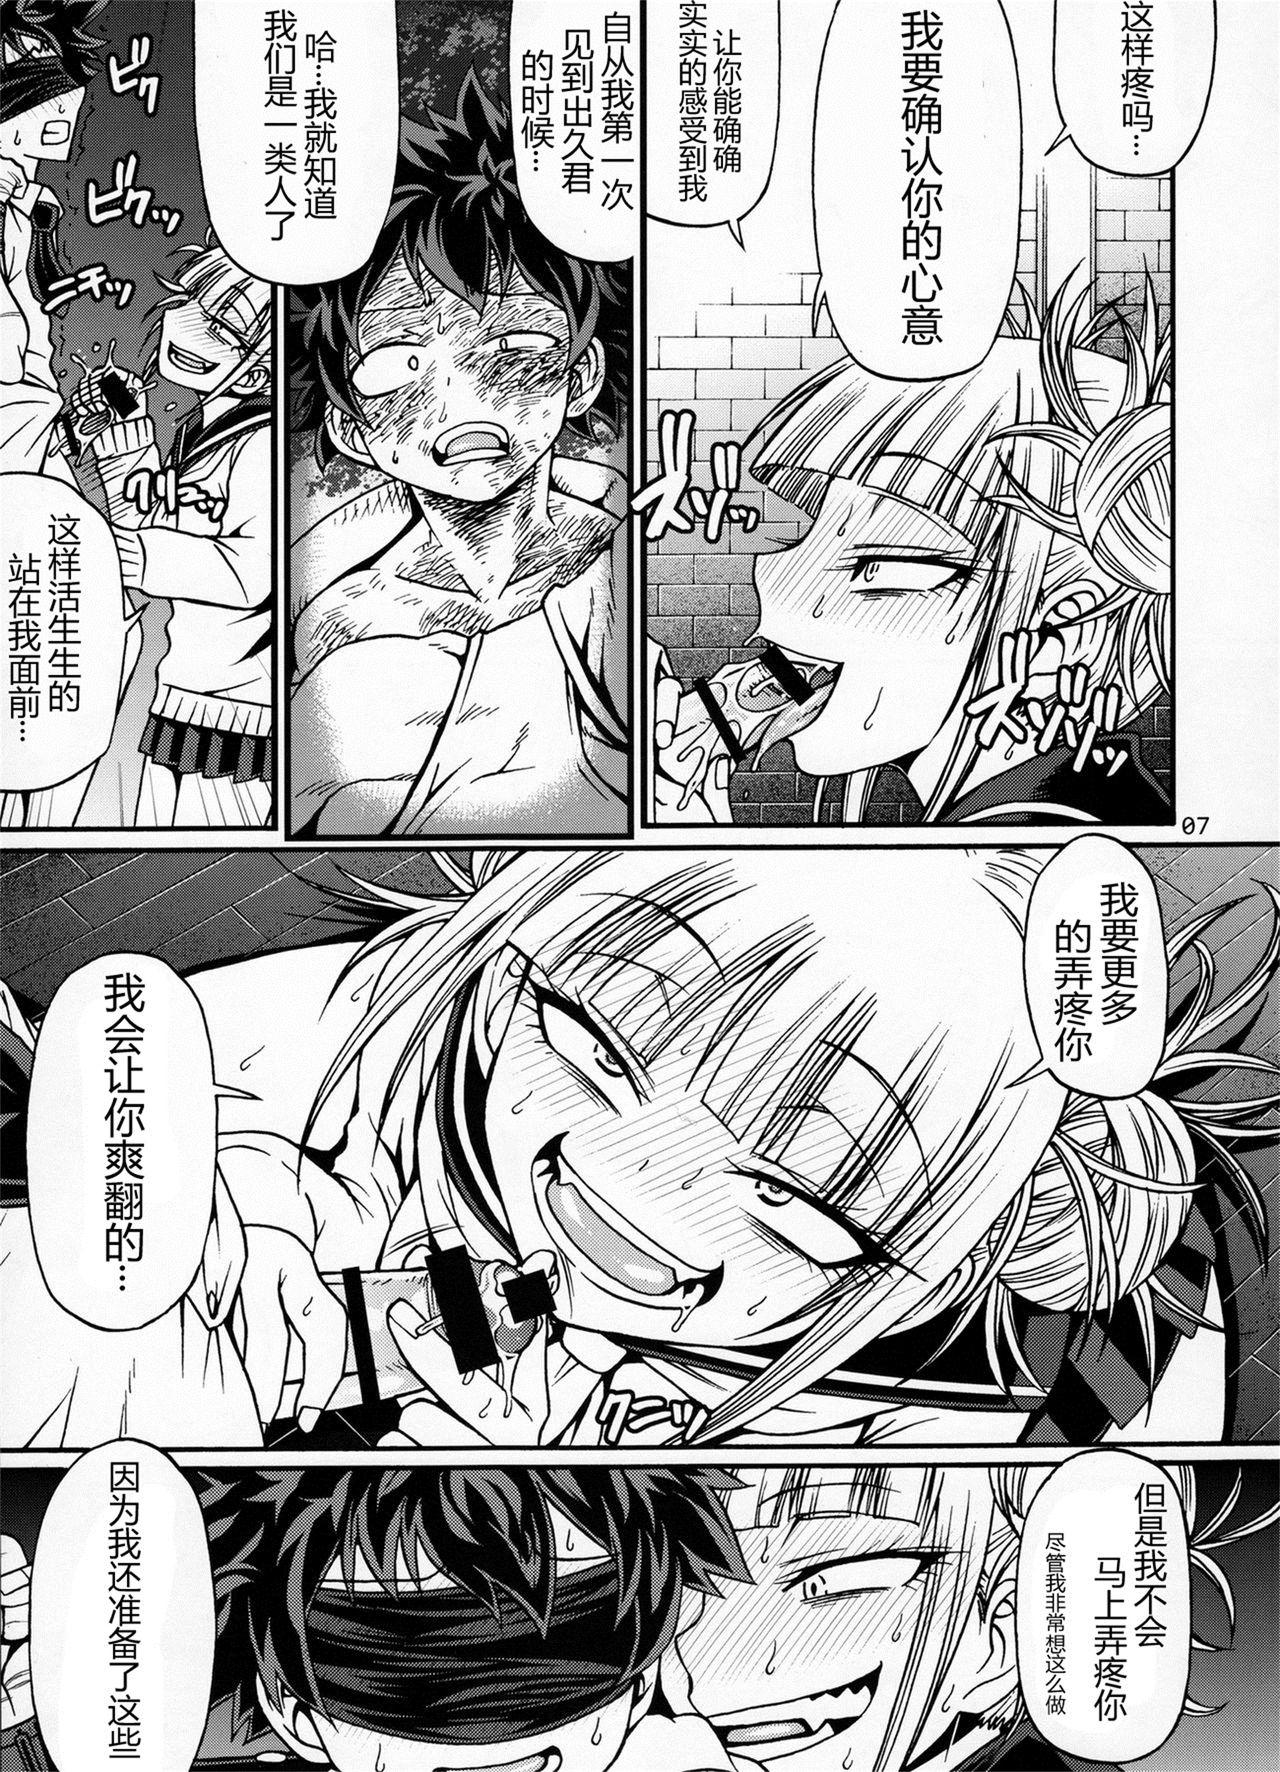 Cop Love you as KILL YOU - My hero academia Small Boobs - Page 7